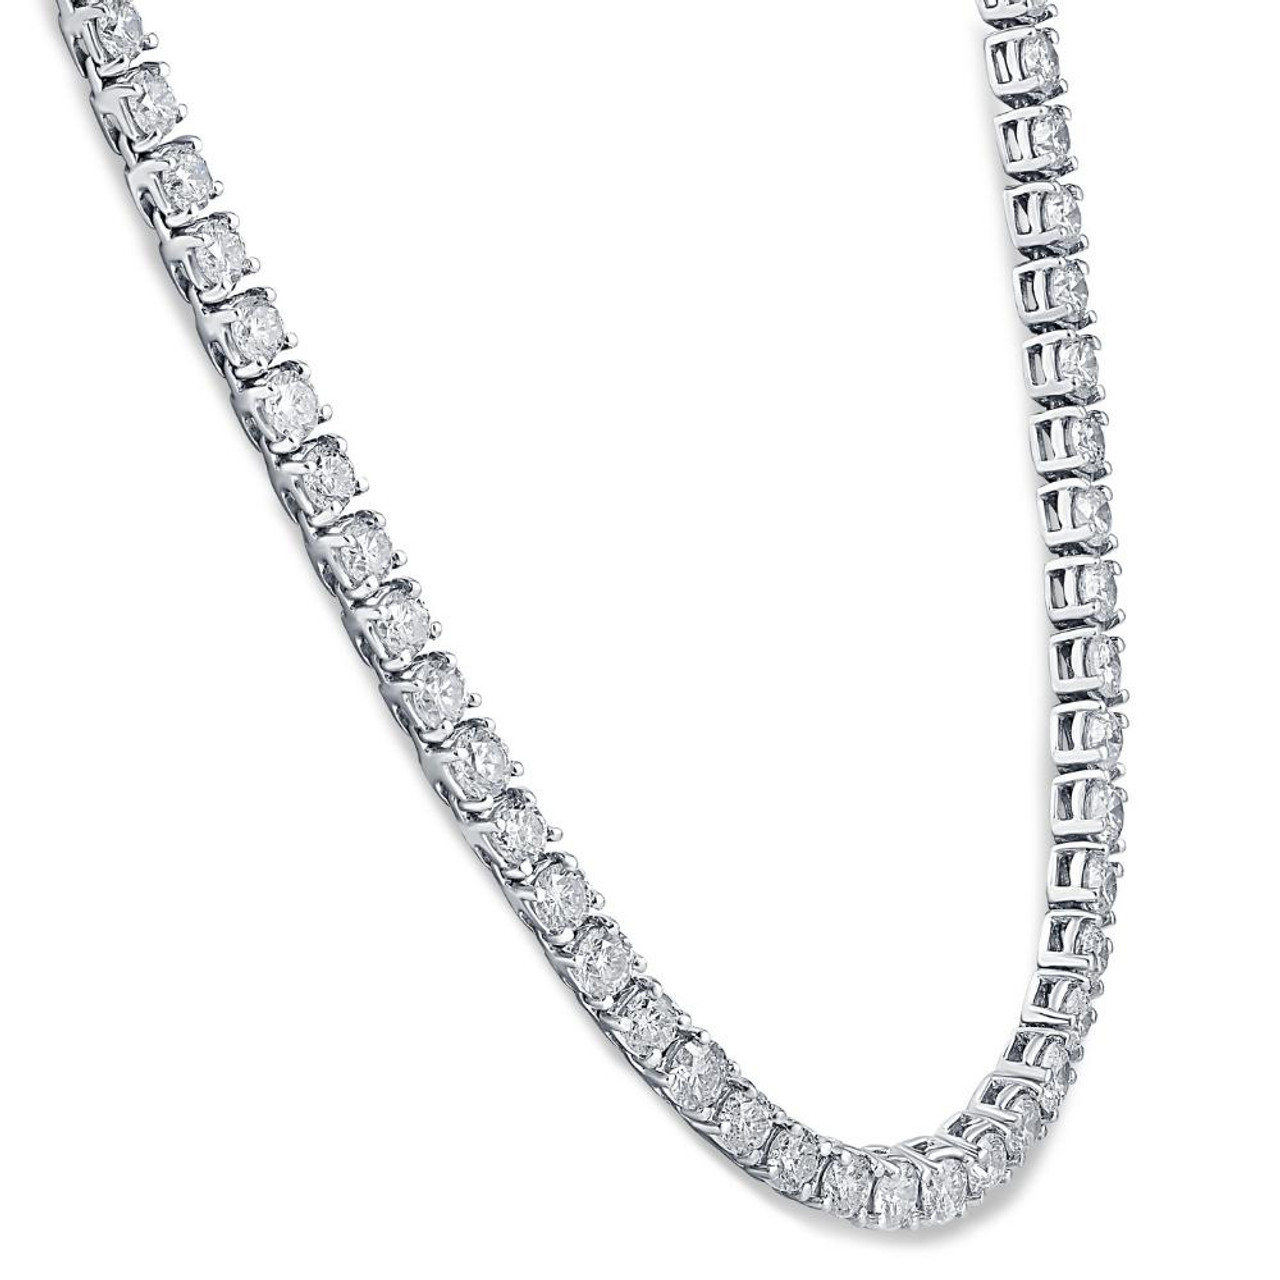 Styling natural diamond necklaces for every neckline